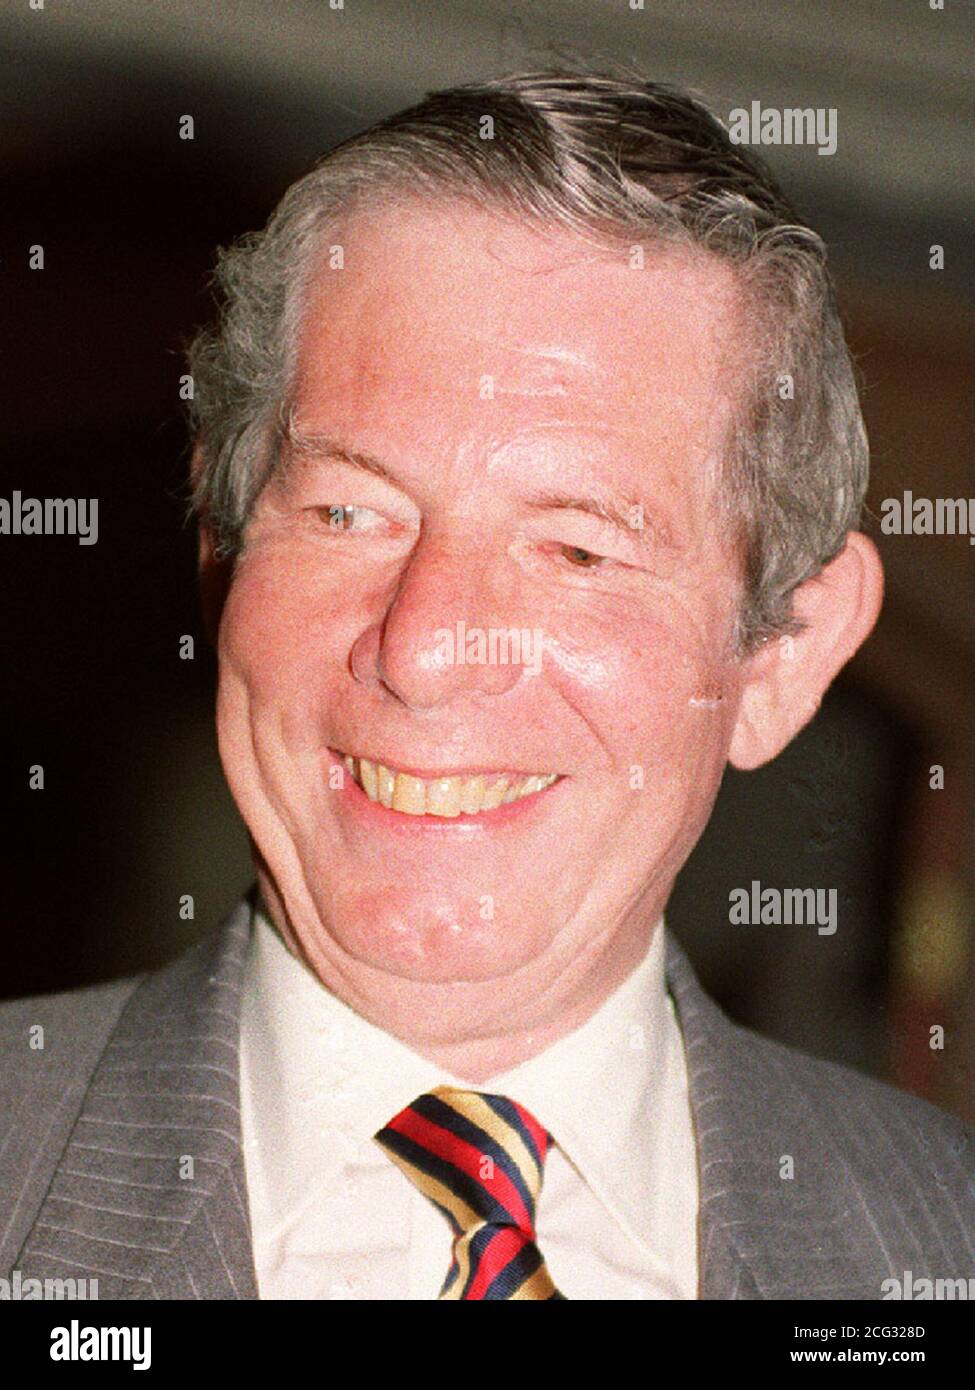 PAP 1 28.11.94. LONDON Library picture 254903-12, dated 15.1. 93. of journalist and broadcaster Derek Jameson  who celebrates his 65th birthday on Tuesday 29.11.94. PA News, Tony Harris. /PJ. Stock Photo